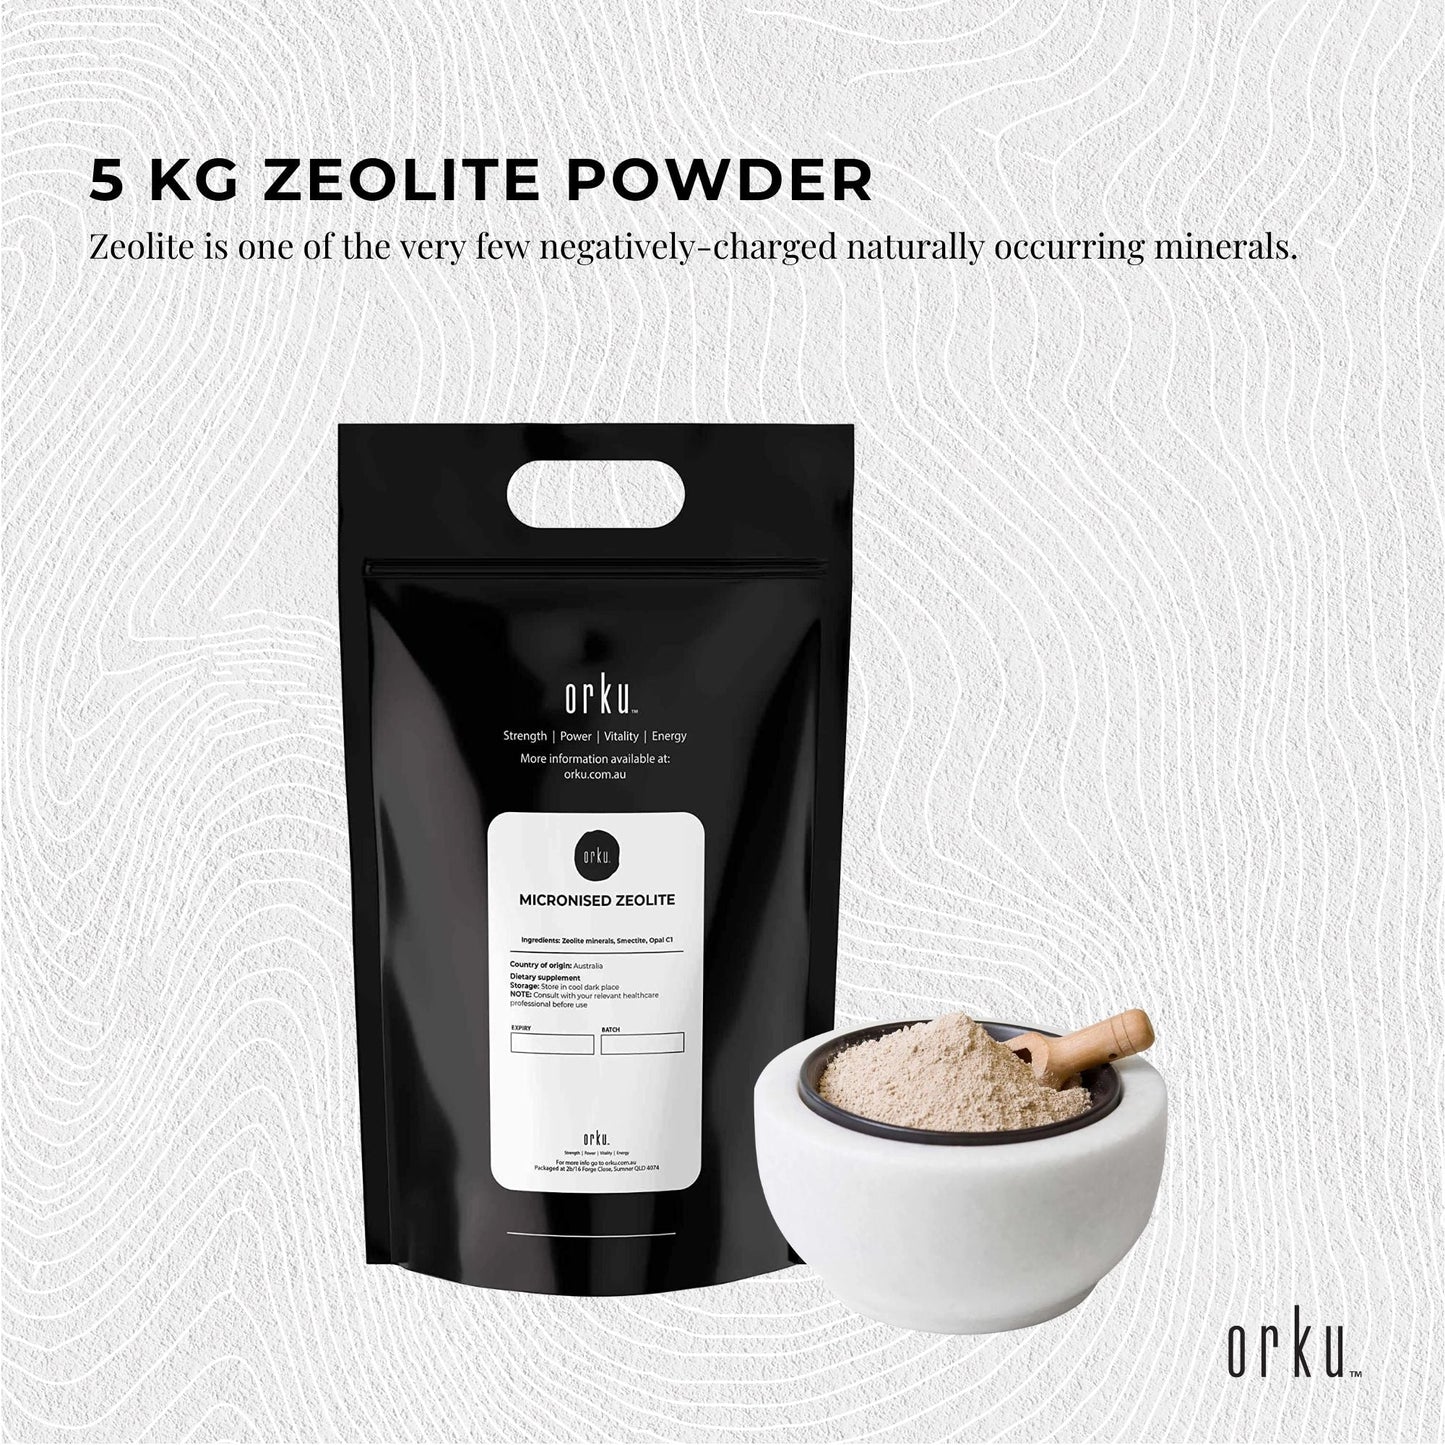 10Kg Pure Micronised Zeolite Powder Supplement Micronized Volcamin